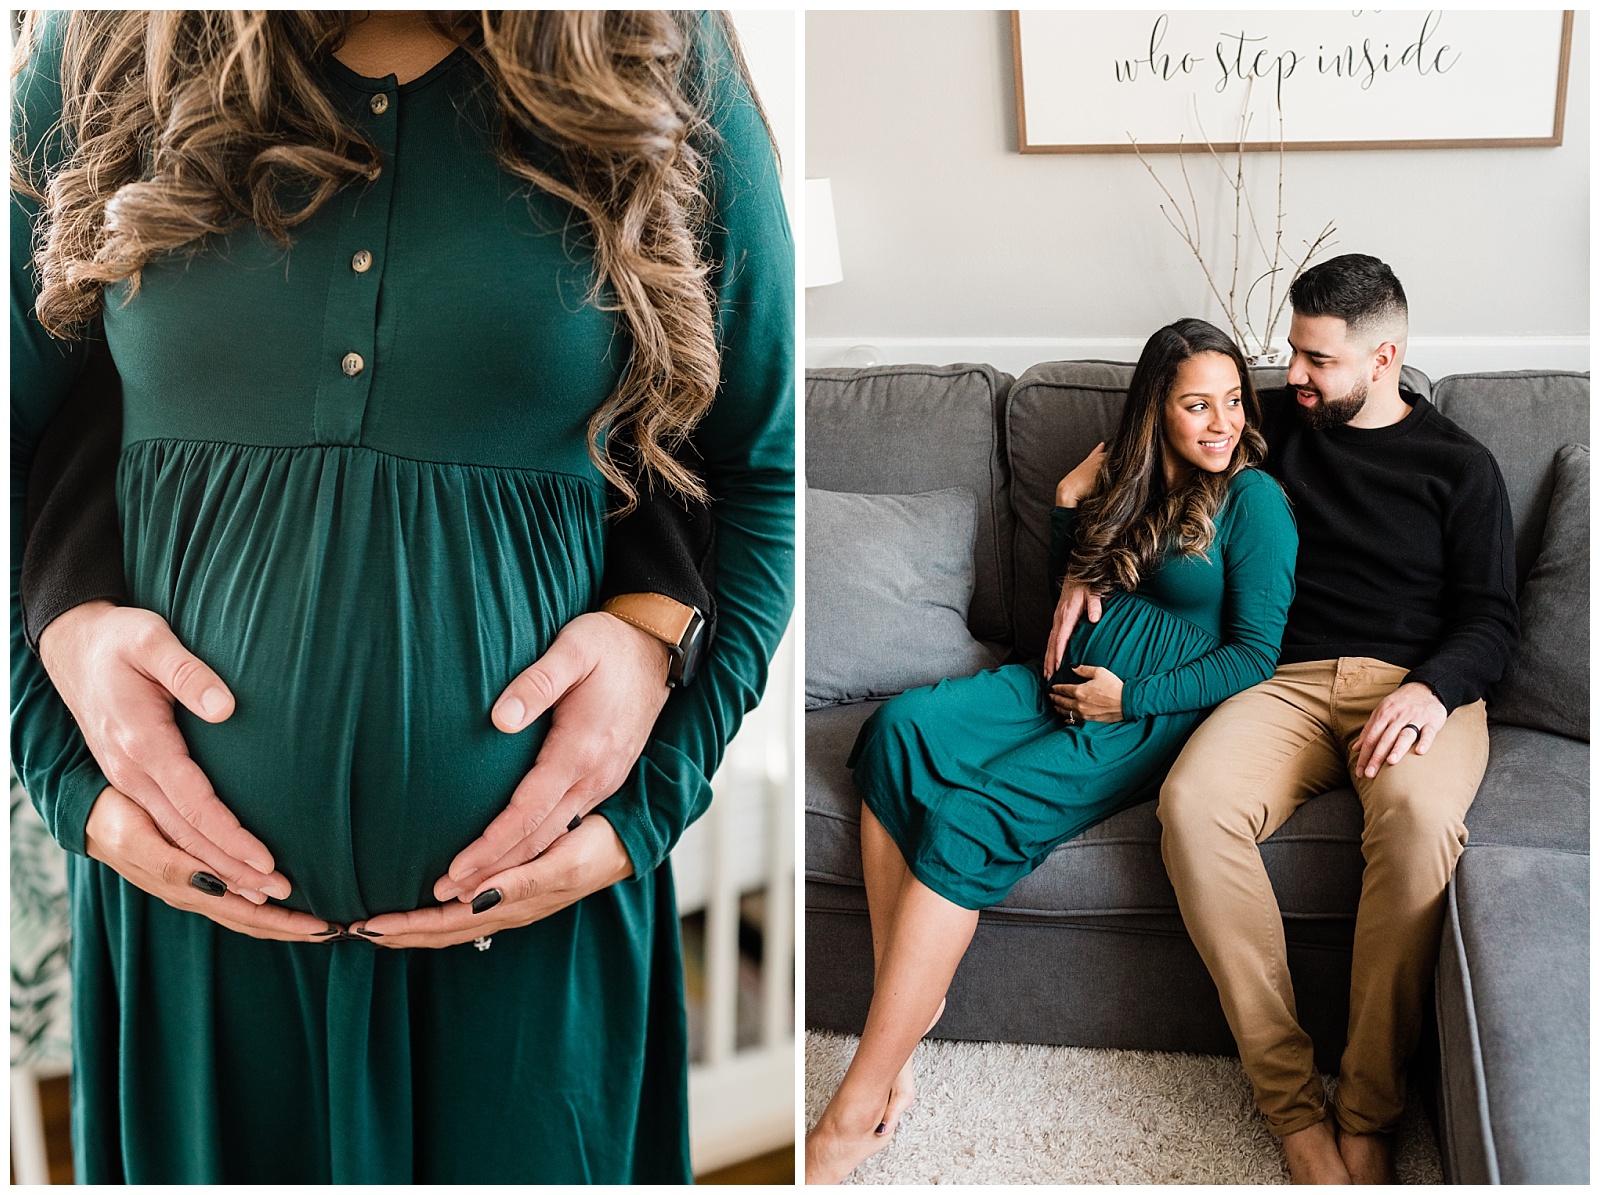 In Home Maternity Session, Nursery, Baby, New Parents, Maternity Shoot, Pregnant, Pregnancy Photos, New Jersey, Photographer, Baby Boy, Couch, Living Room, Home, Family Time,, Photo